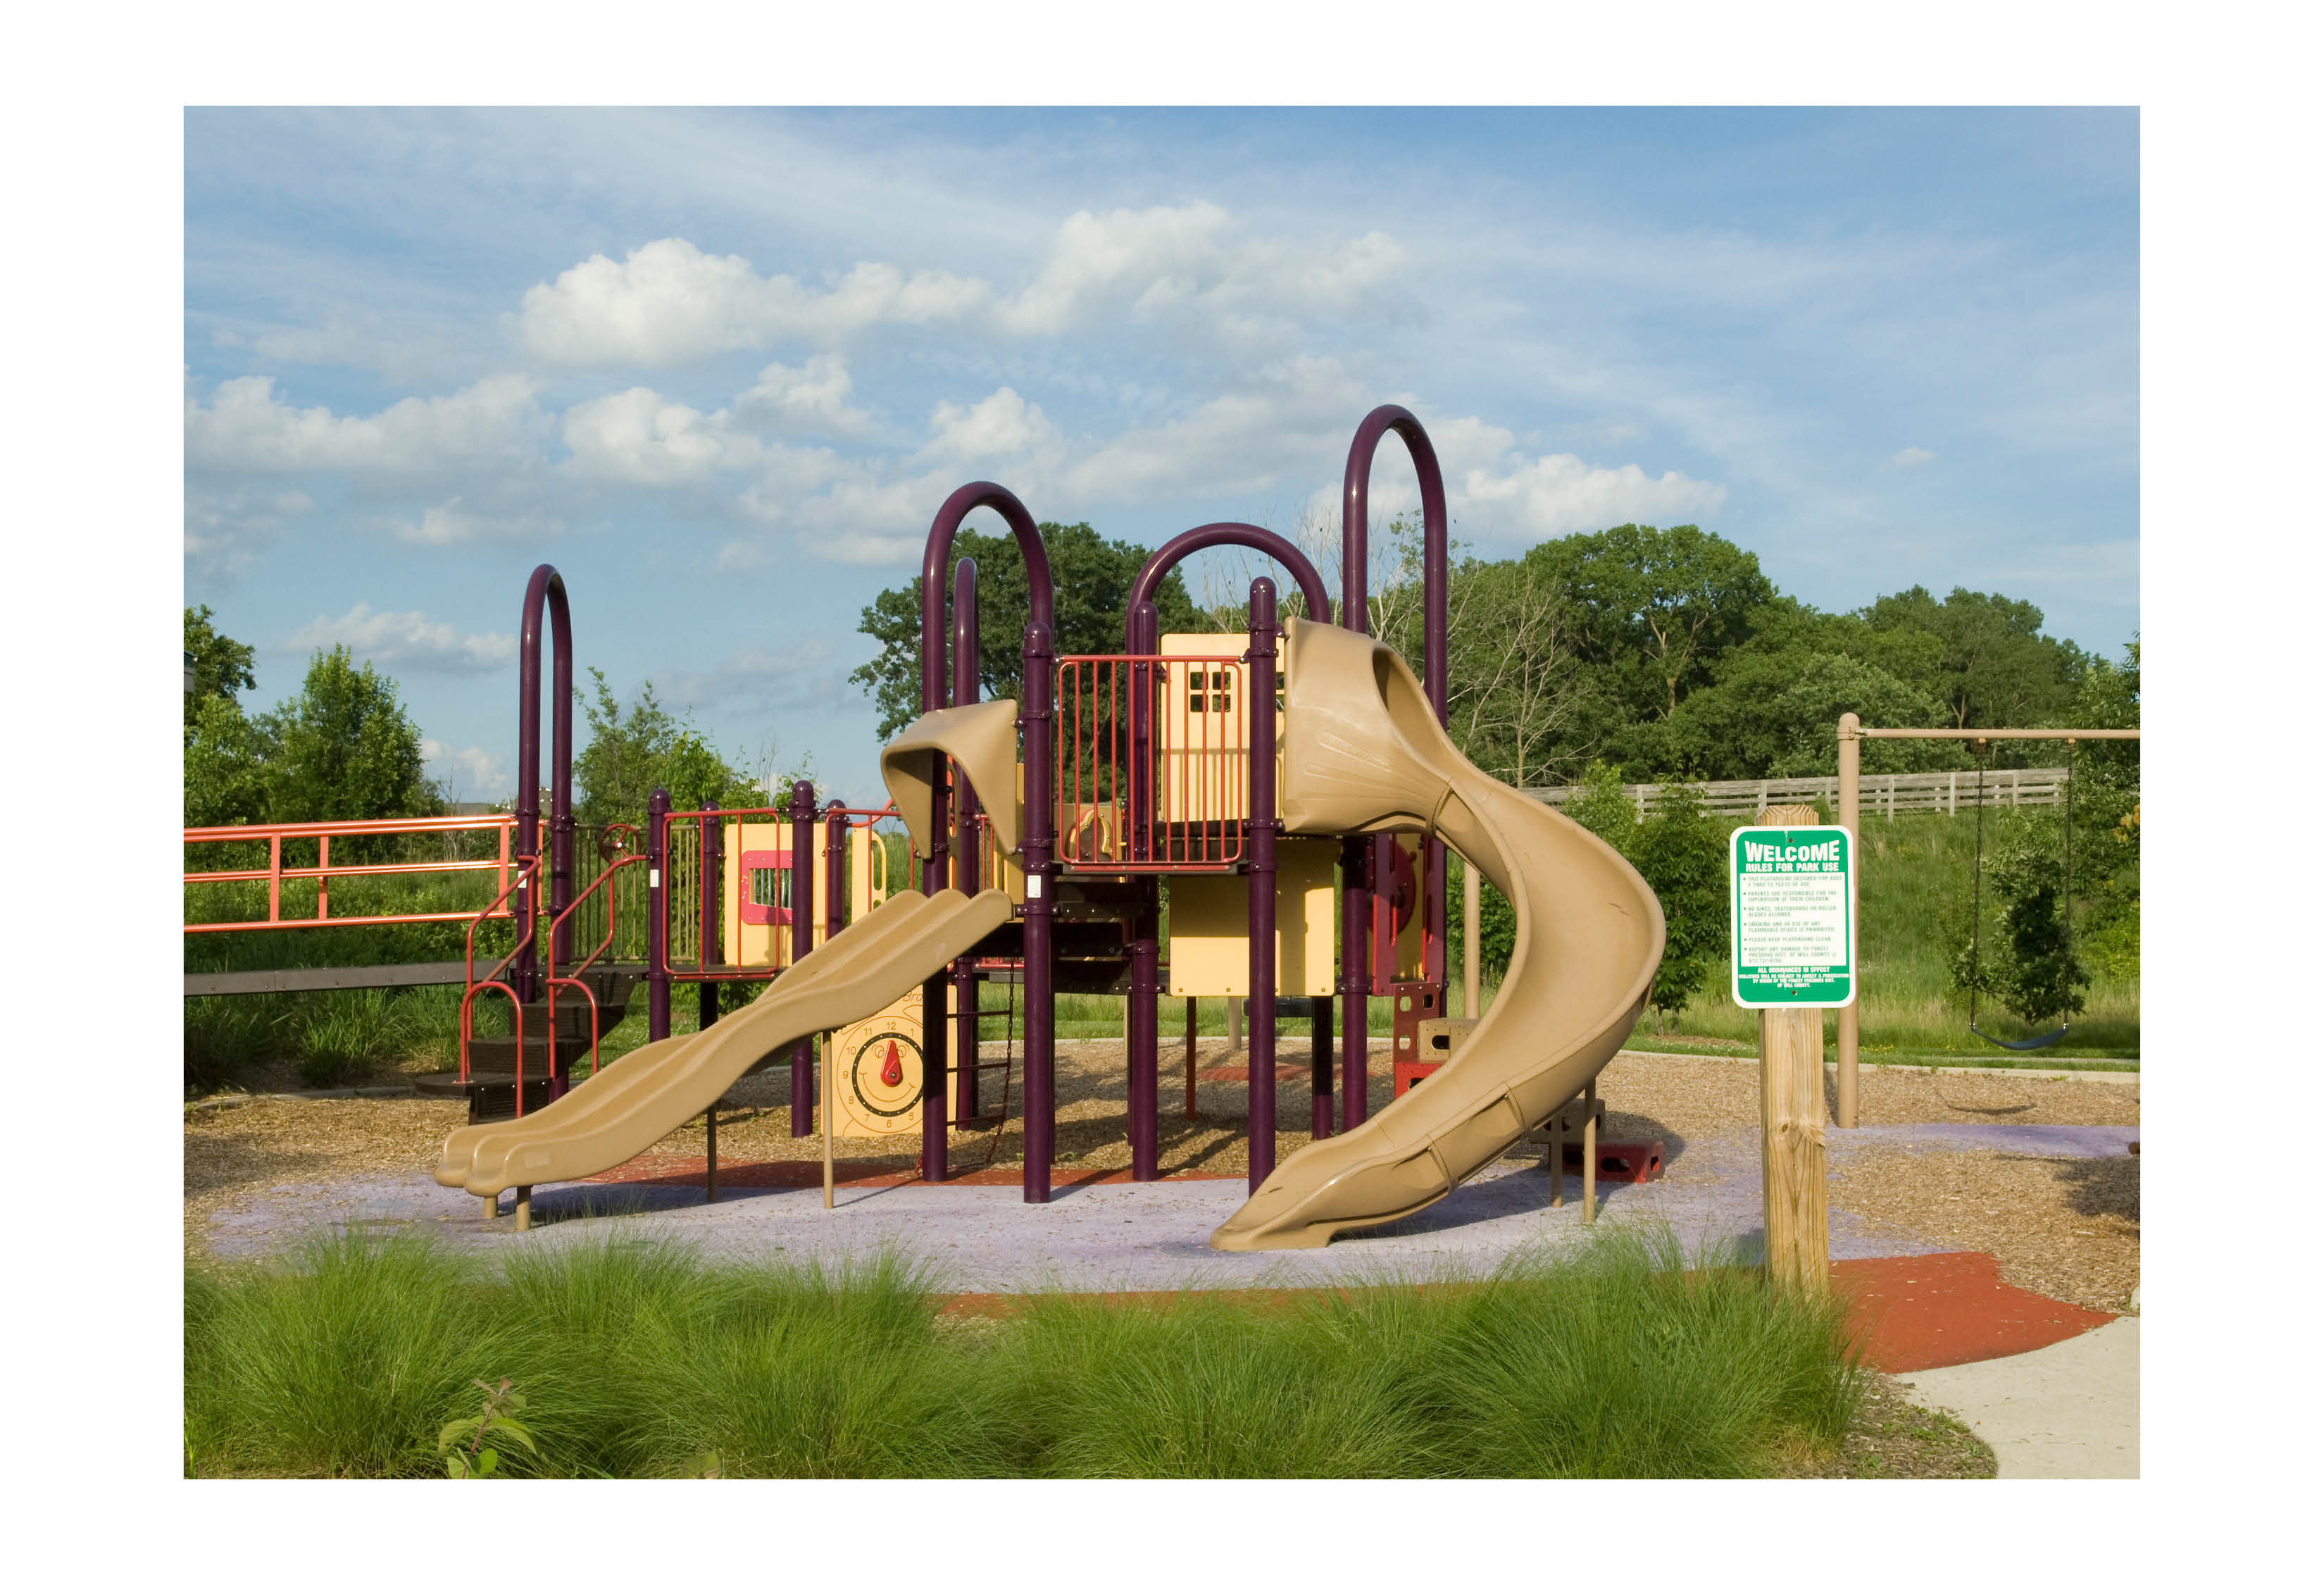 The playground at Hickory Creek Preserve.